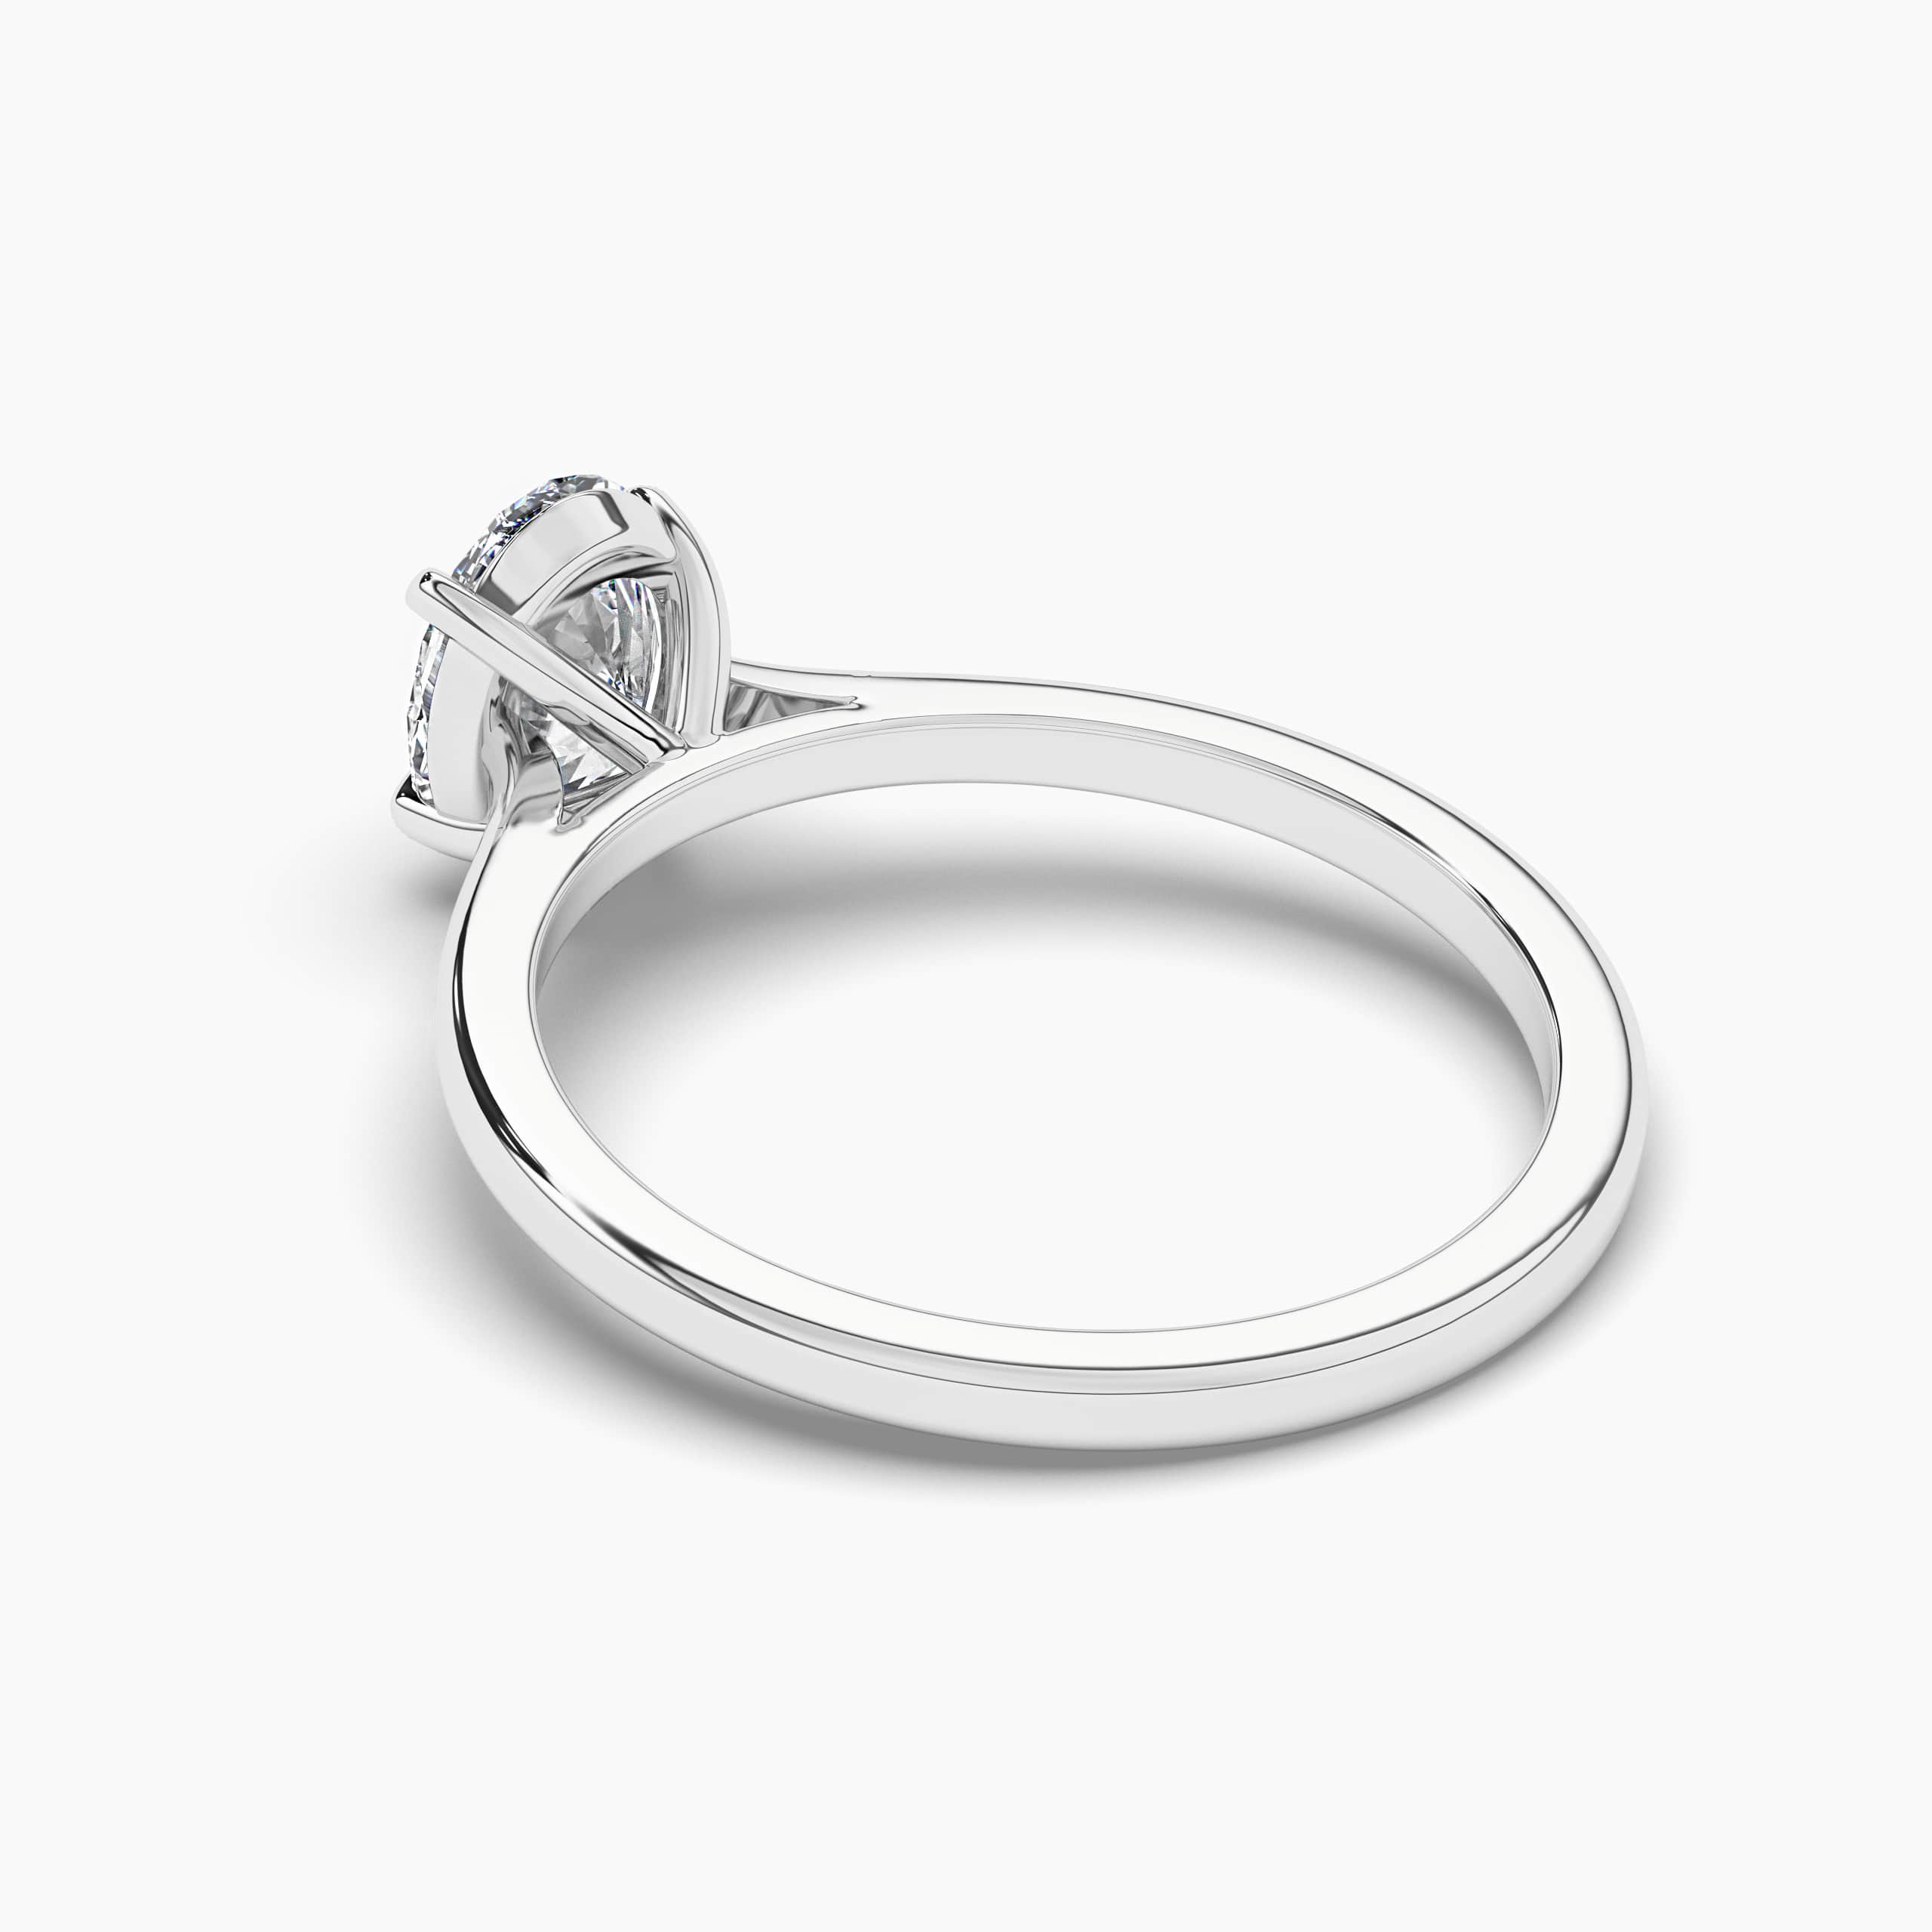  Oval Solitaire Engagement Ring White Gold